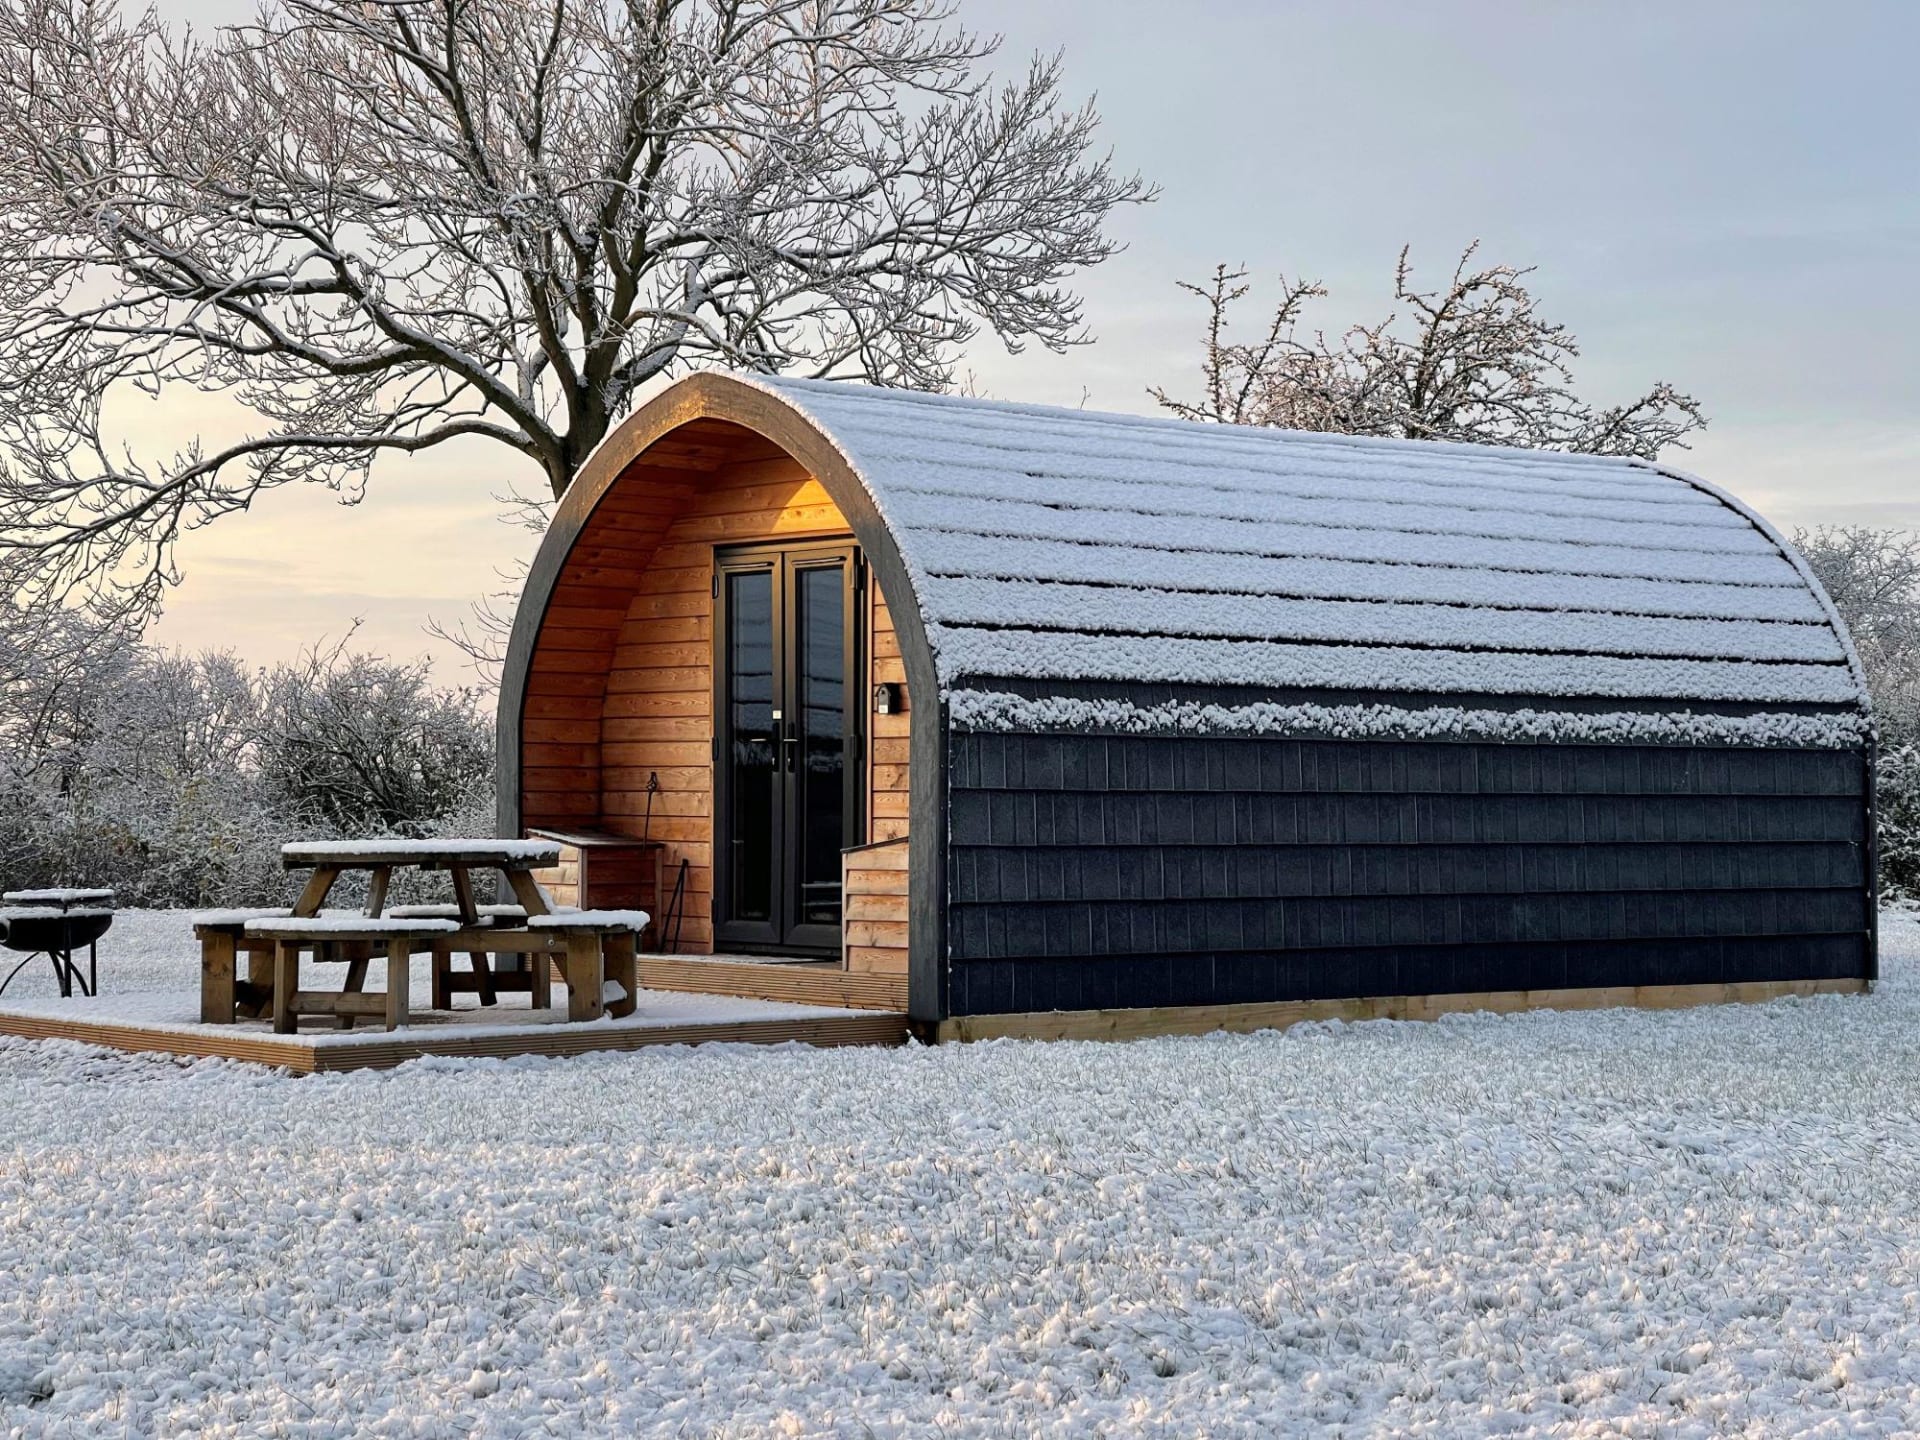 A snow-covered glamping pod